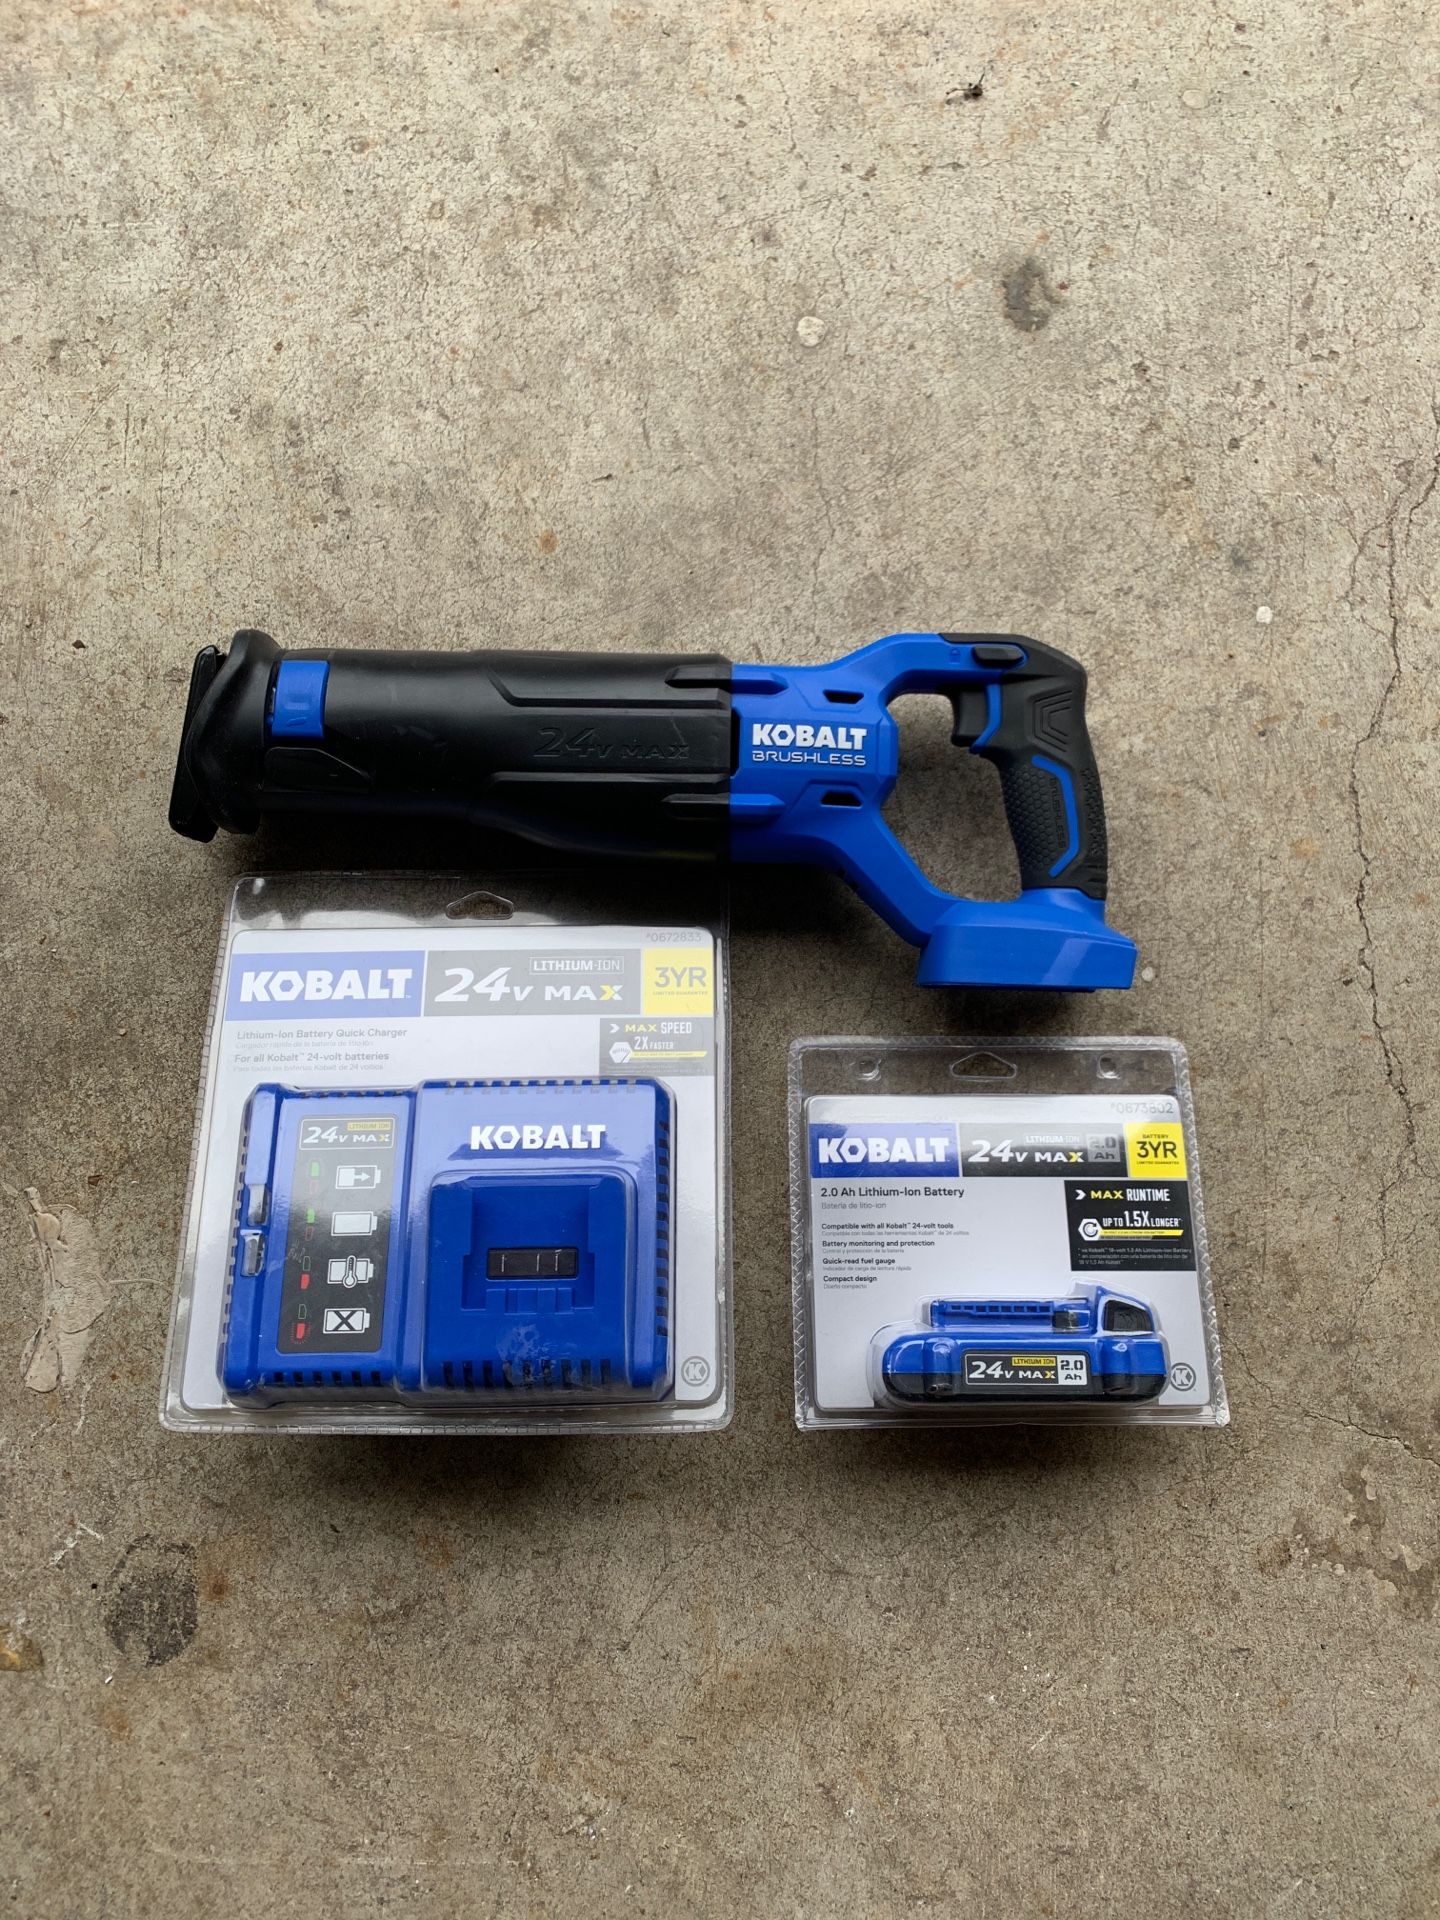 Kobalt Brushless sawzall or reciprocating saw with charger and battery NEW! Trades?